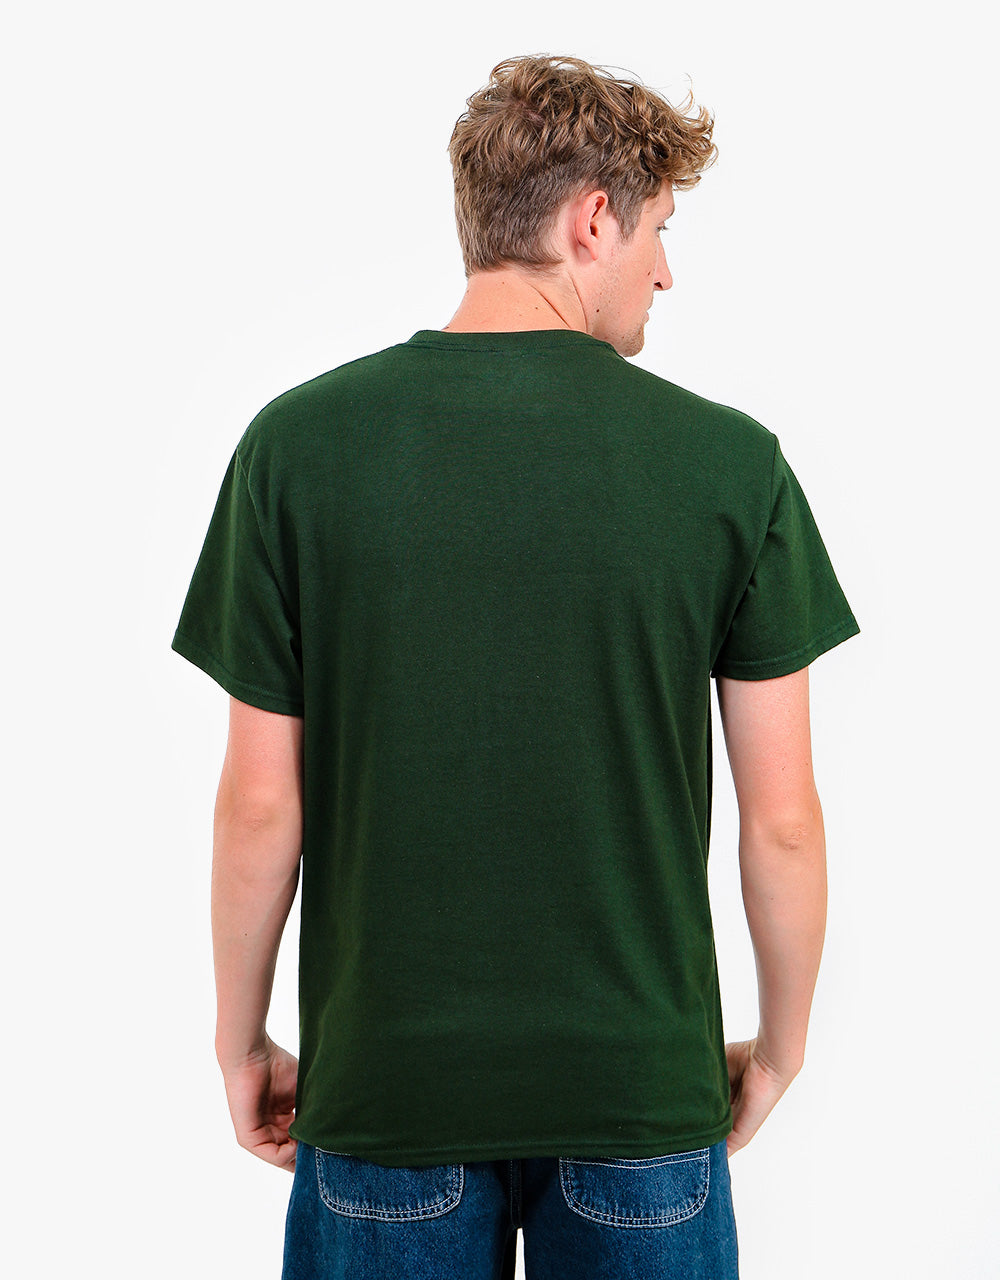 Route One Flagpole Sitta T-Shirt - Forest Green